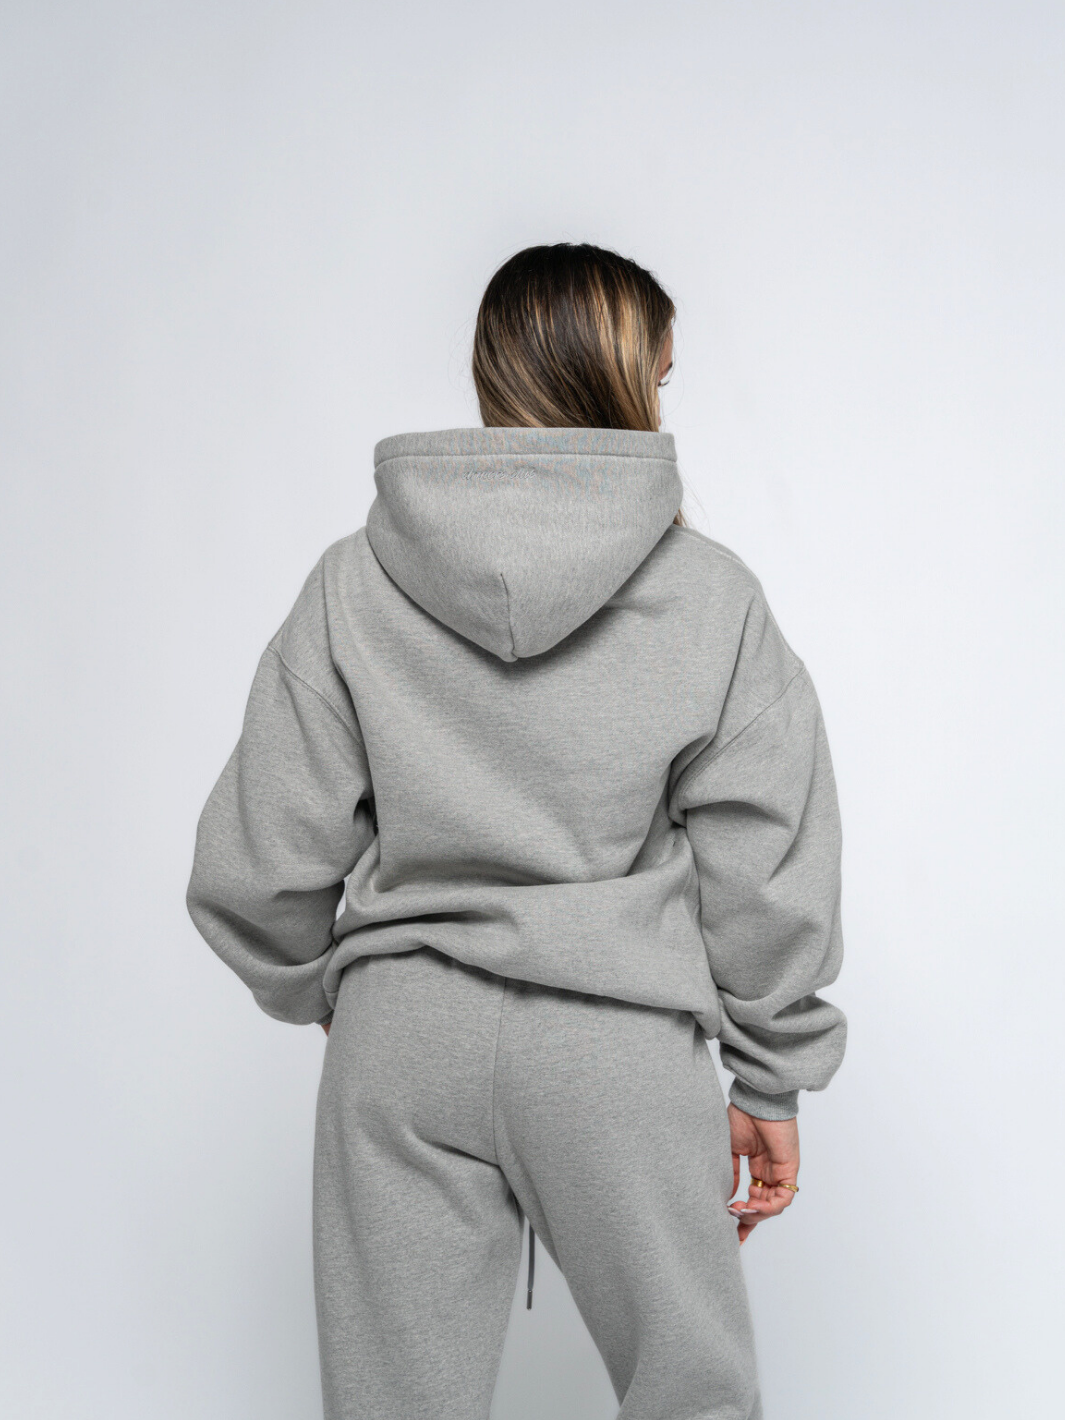 Heather Grey Hoodie - Know Better, Do Better